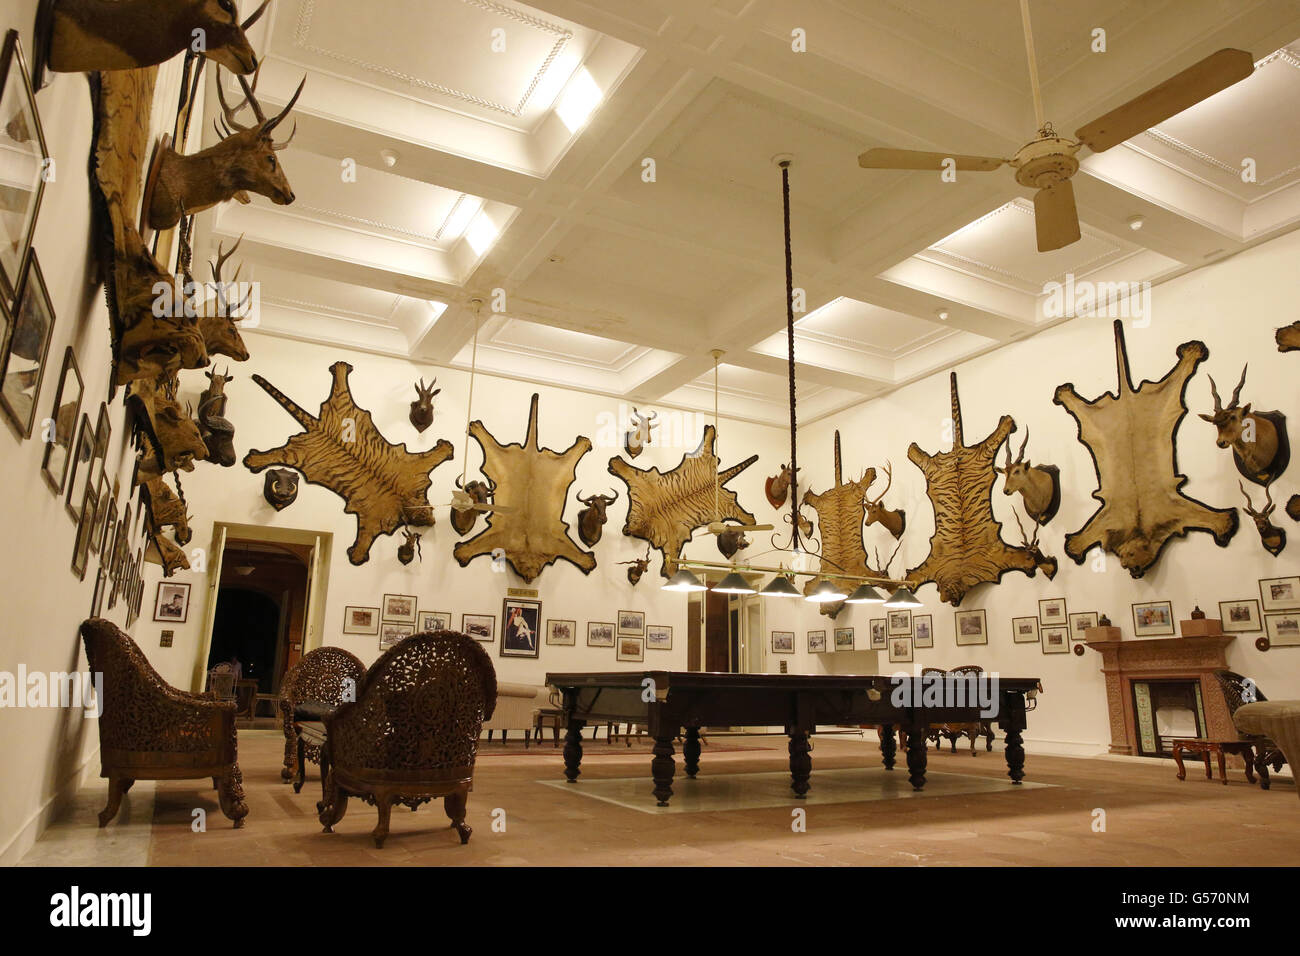 Hunting trophy room with tiger skins, lion skins and mounted deer and antelope heads on walls, The Trophy Room, Laxmi Niwas Palace, Bikaner, Thar Desert, Rajasthan, India, February Stock Photo